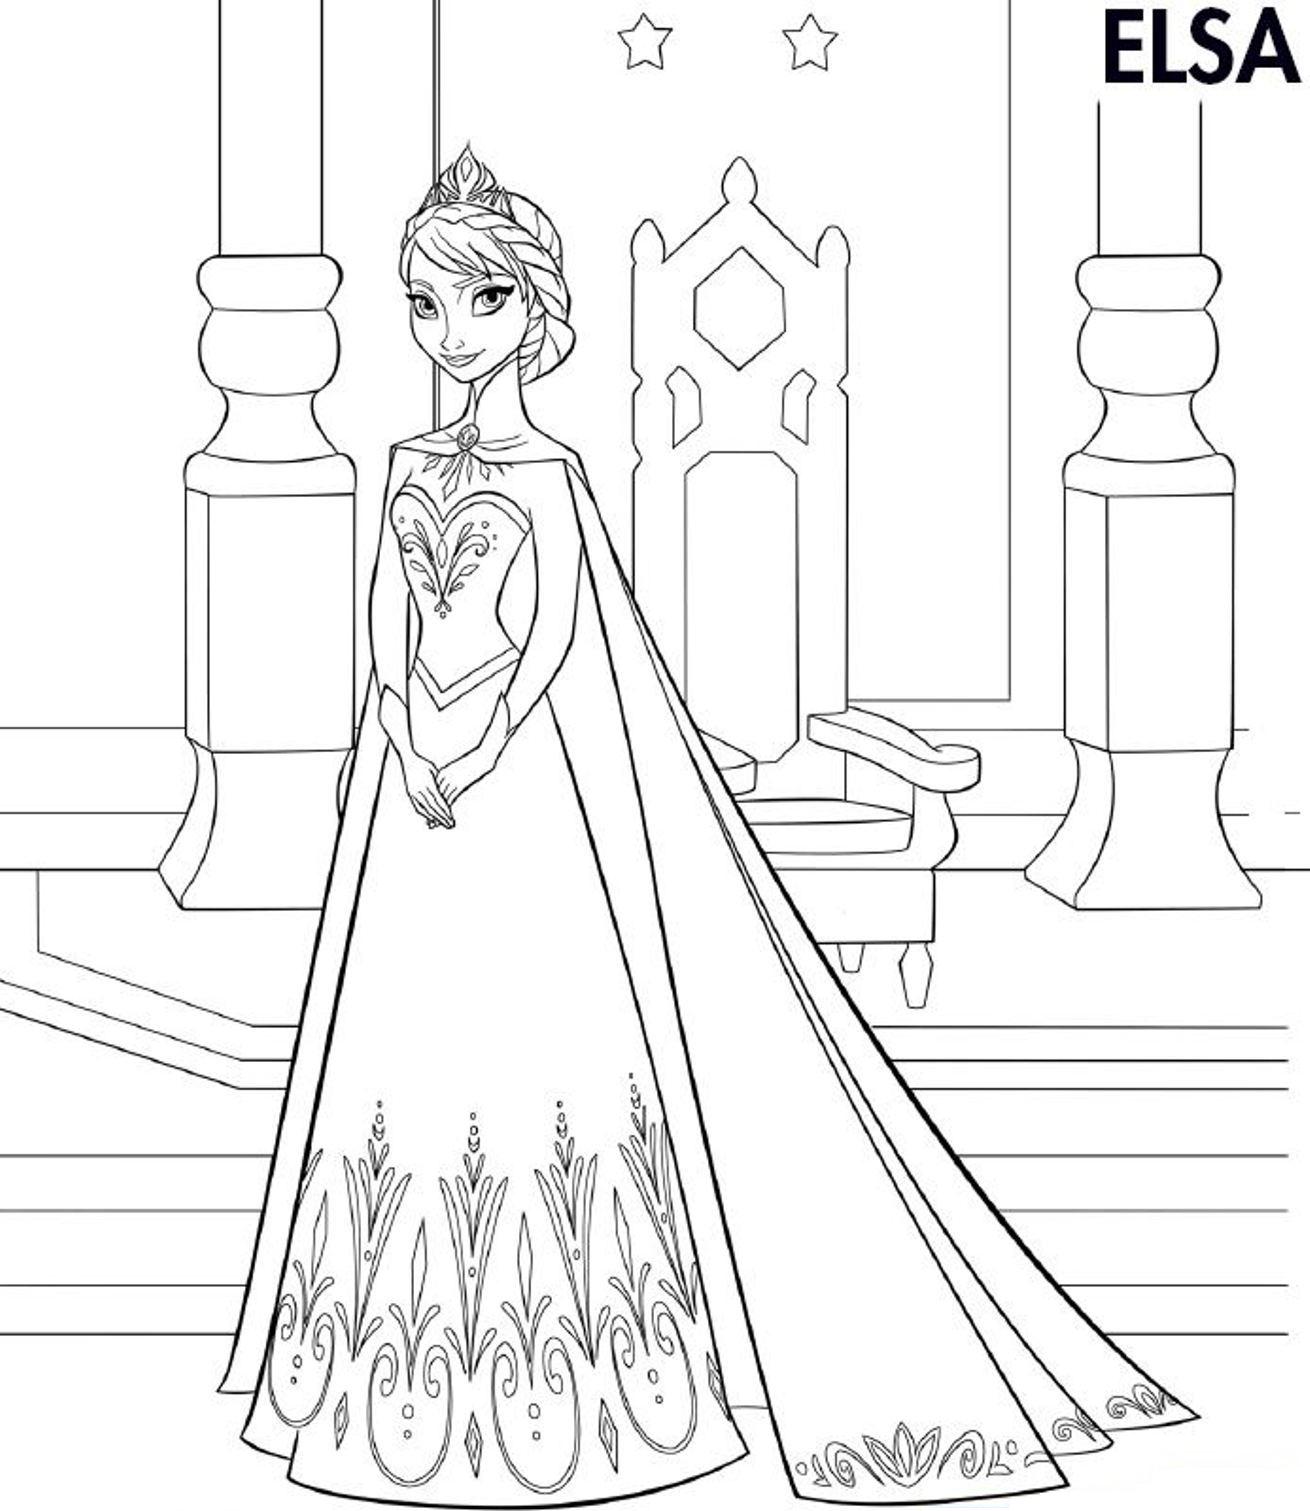 Elsa Frozen Coloring Page   Cartoon Coloring Pages Of Pagestocoloring